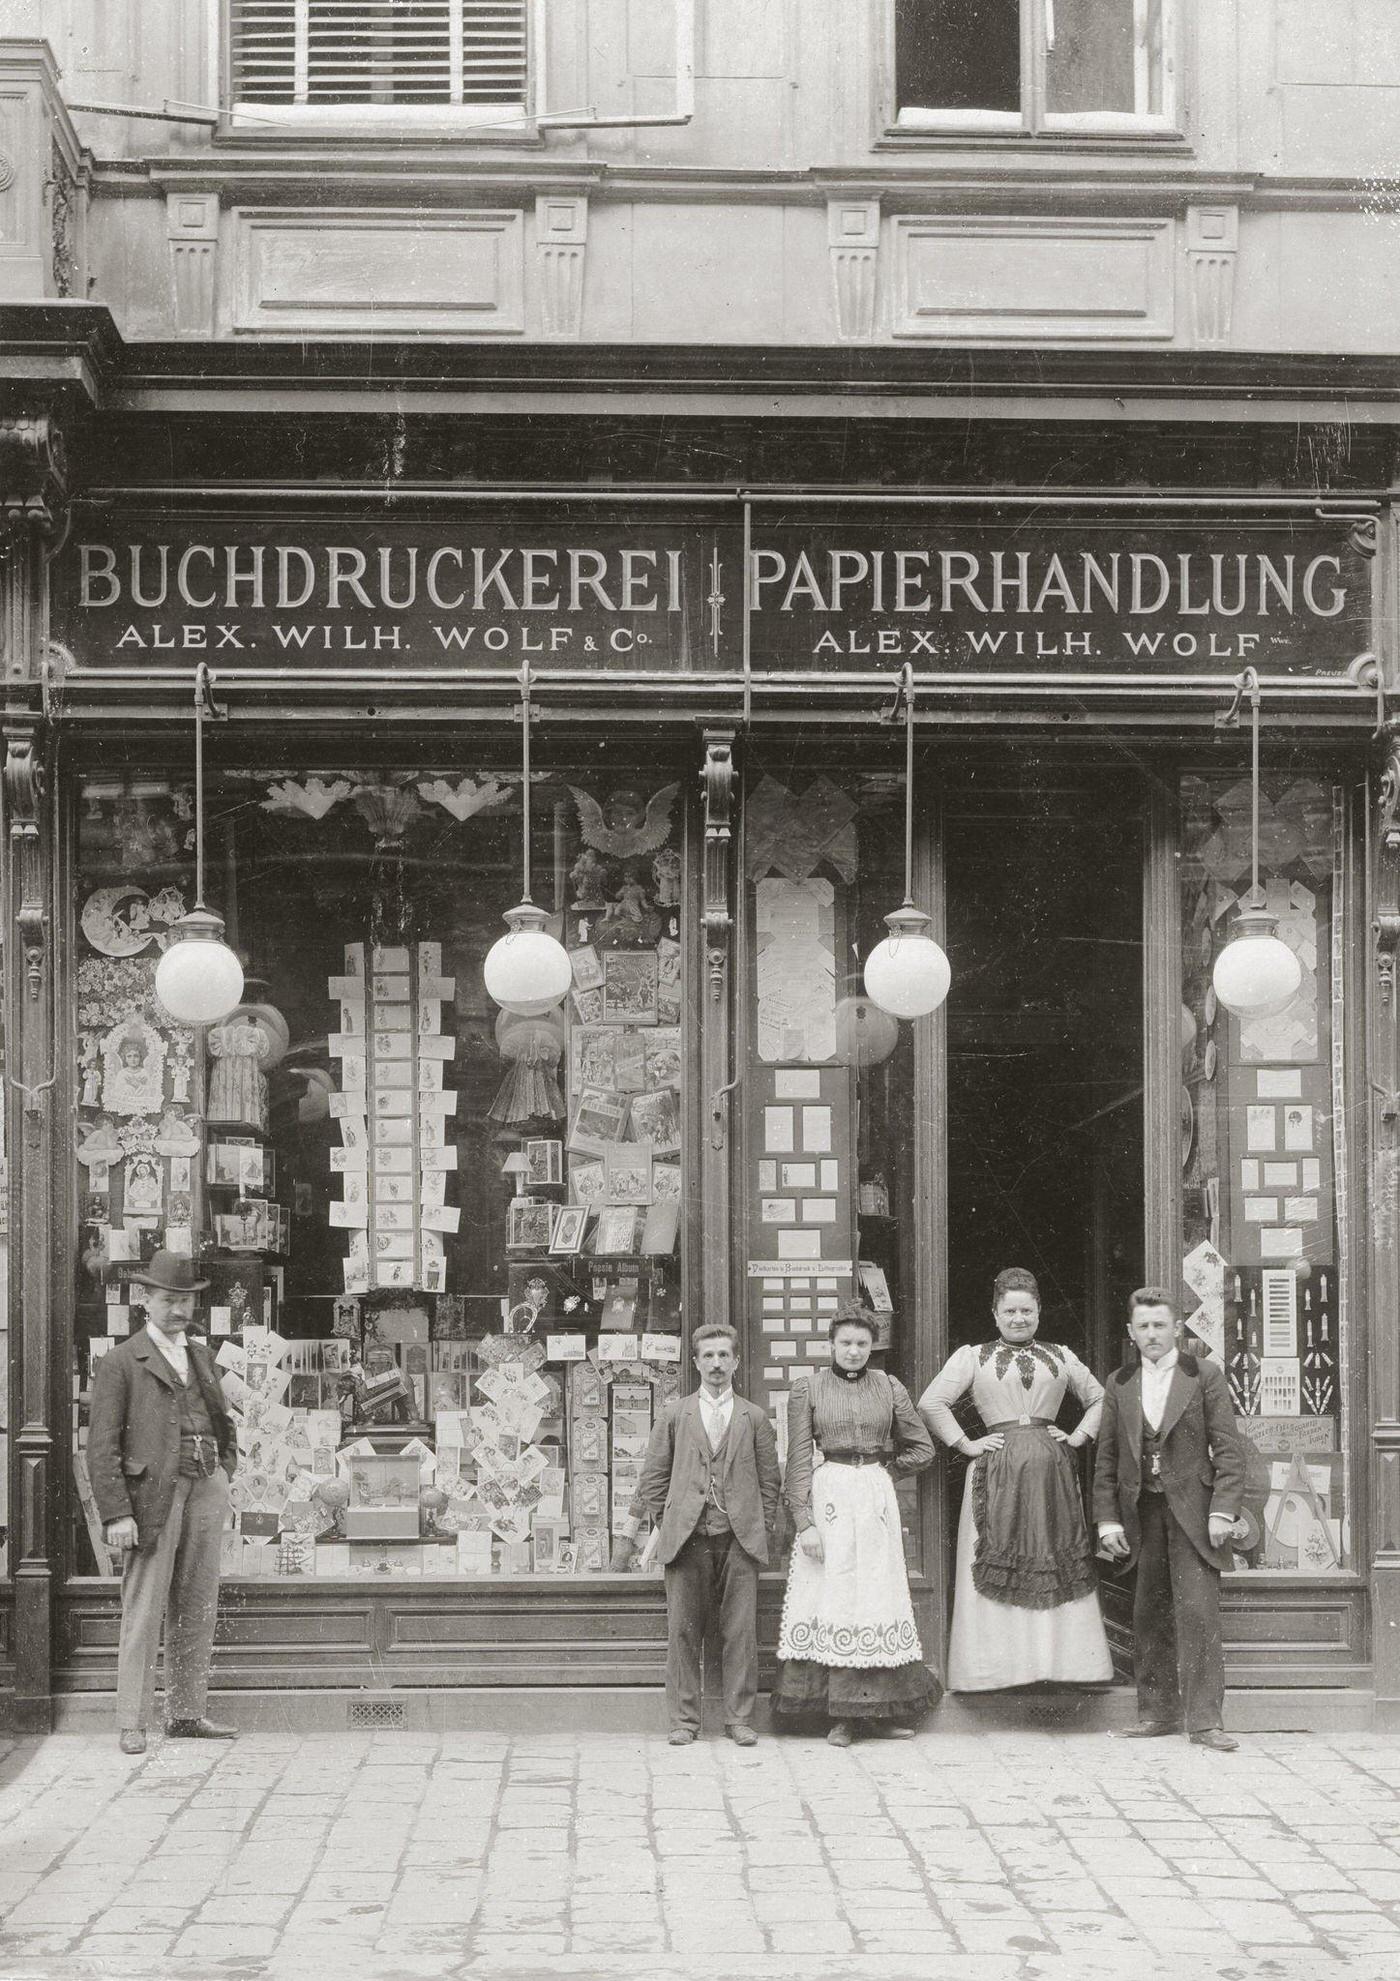 Store for paper products, Währinger Strasse, Vienna, 1900s